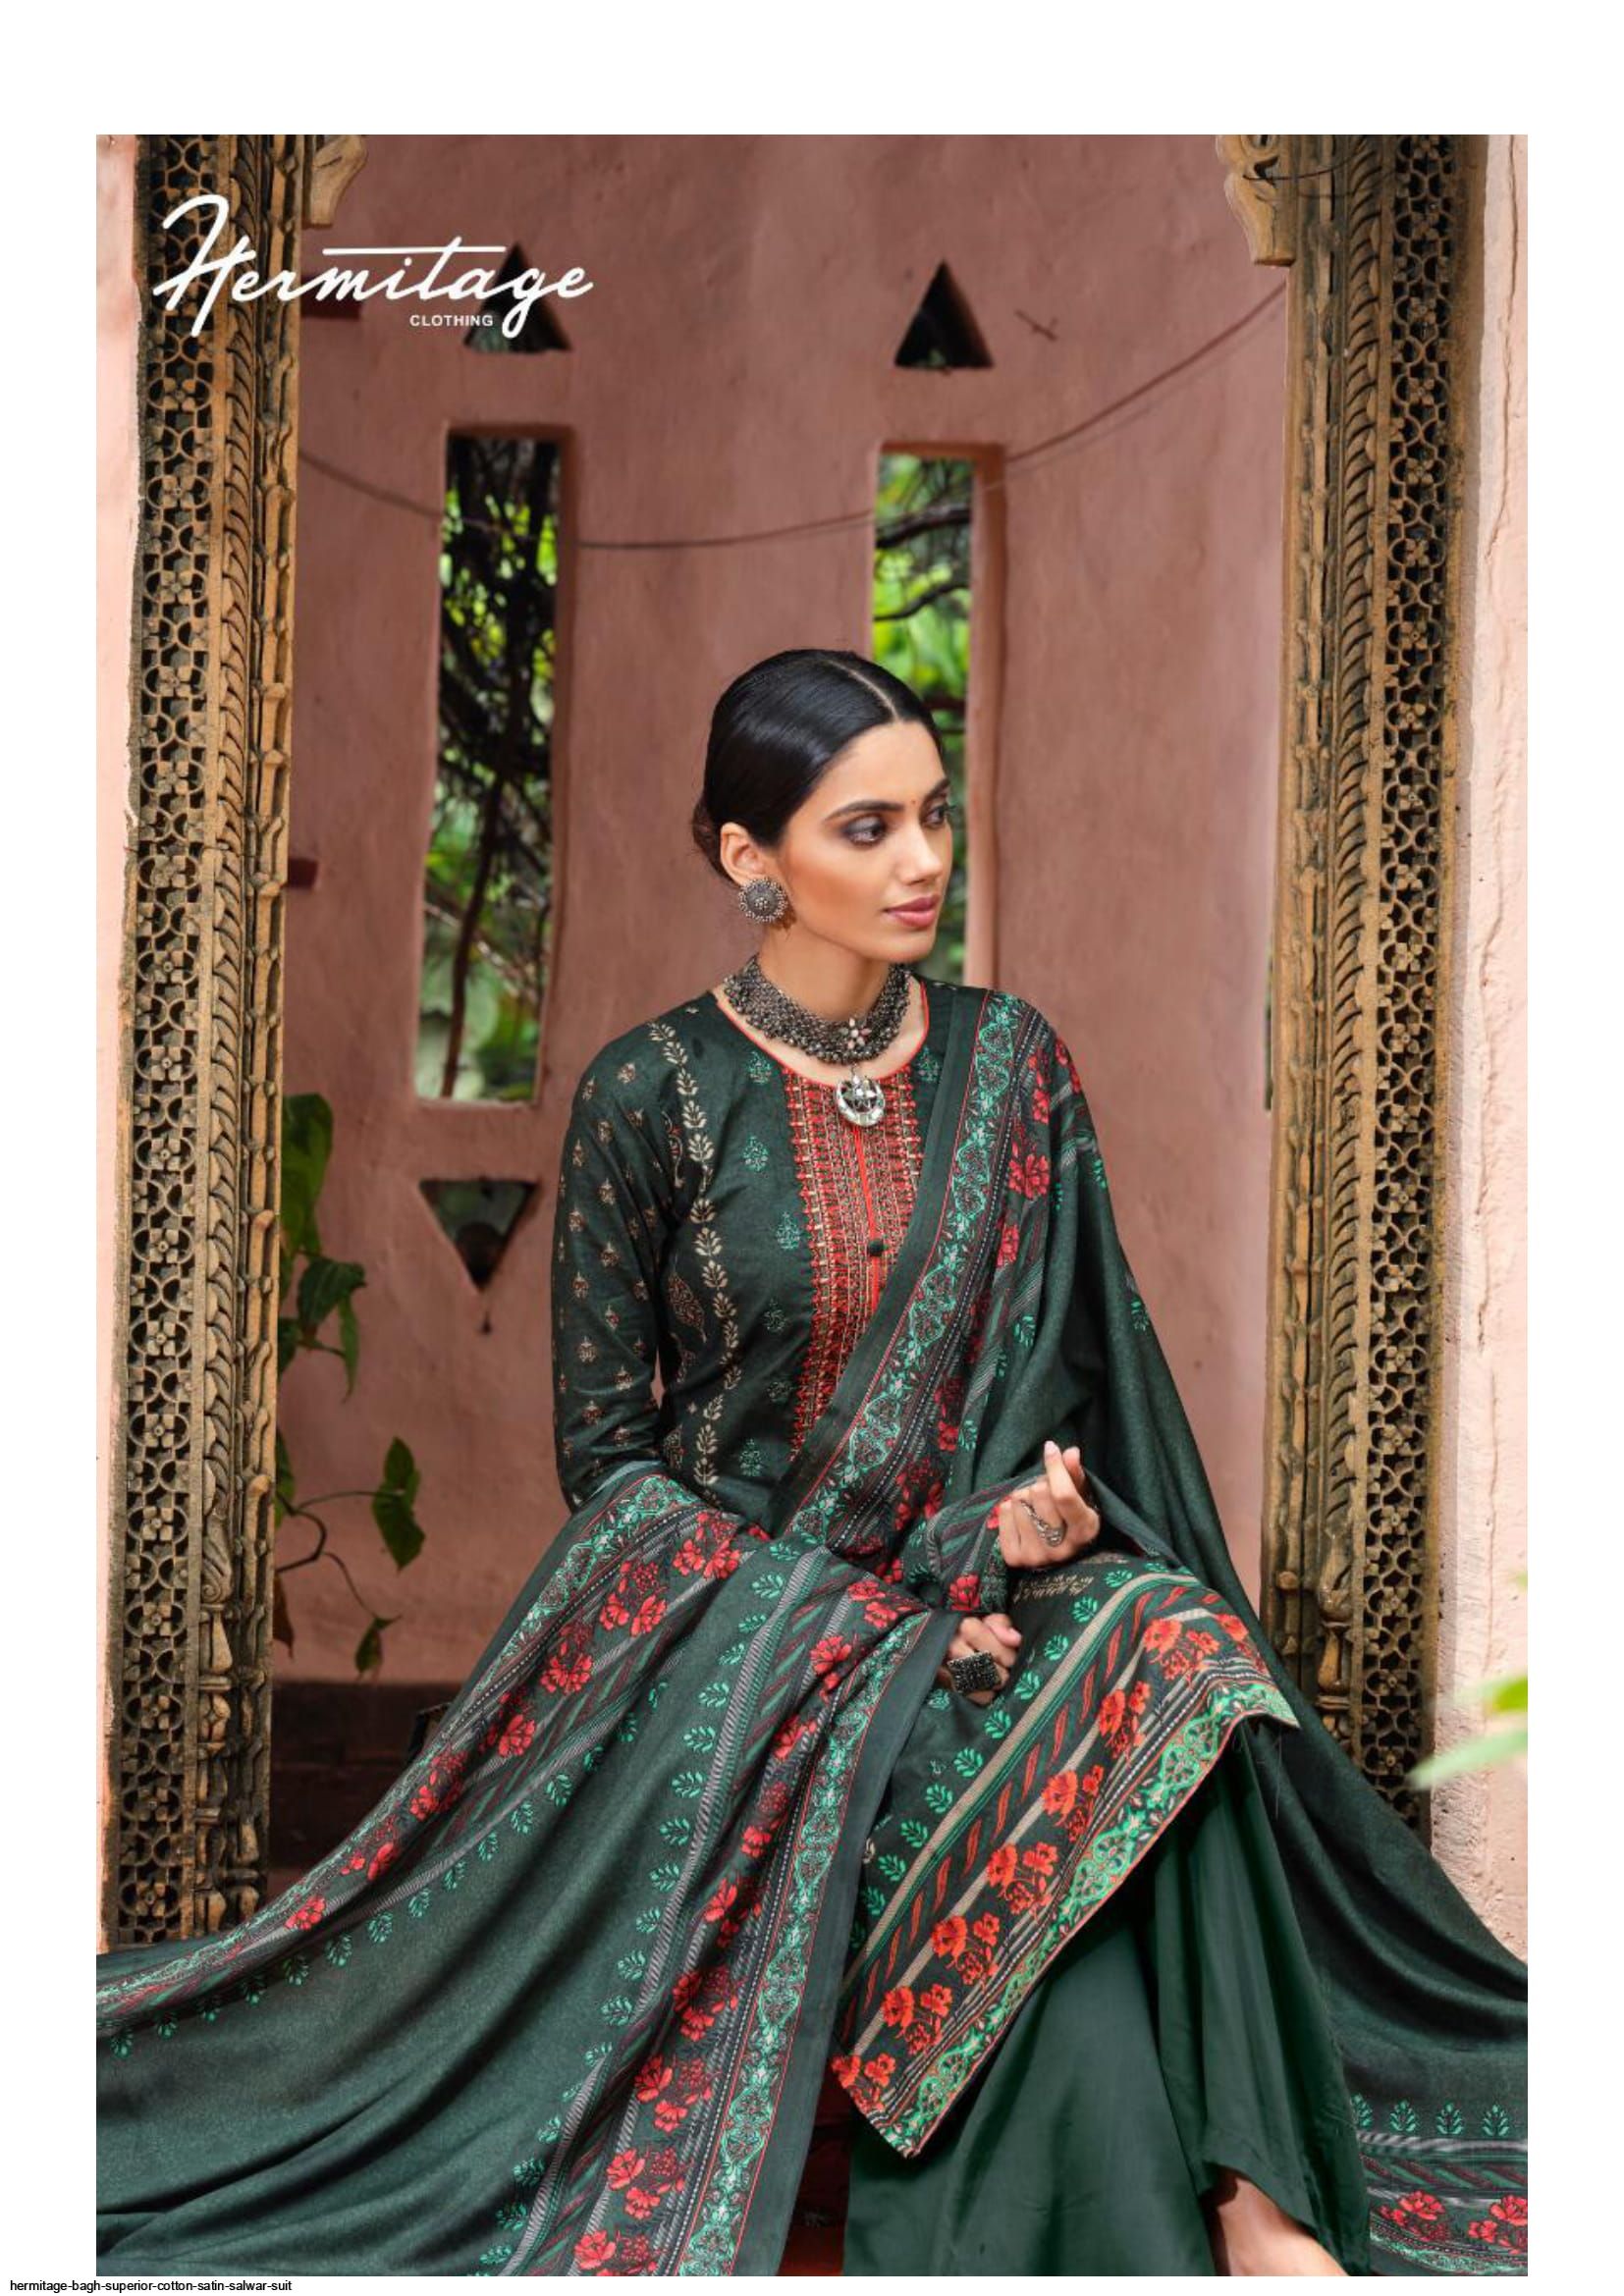 Hermitage Clothing Bagh 1005